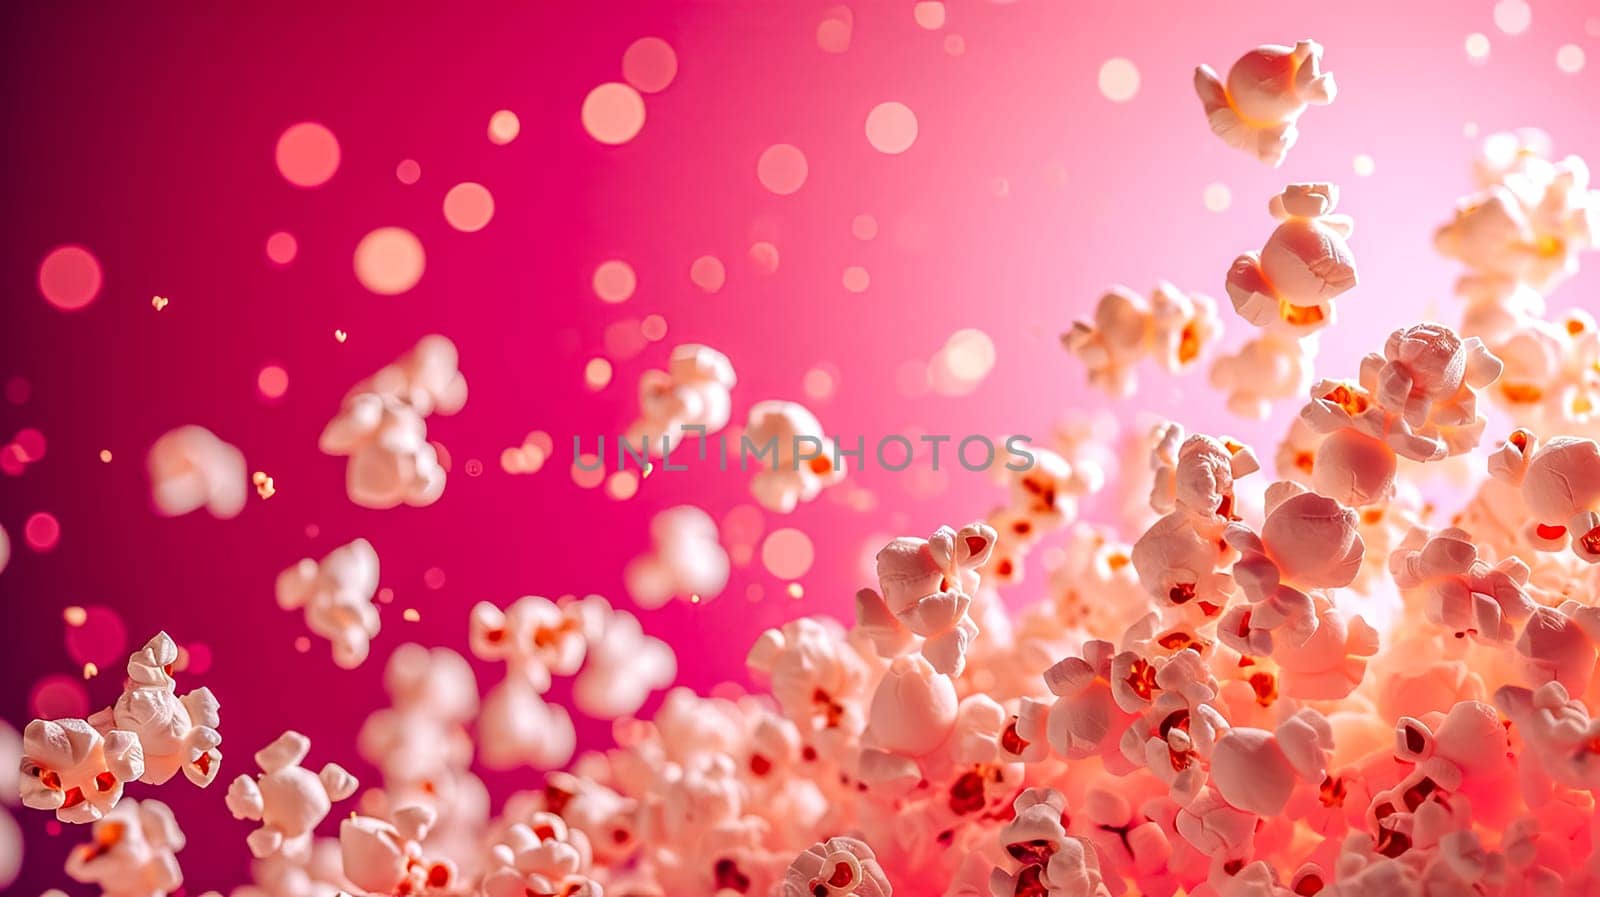 Exploding popcorn against a vibrant pink bokeh background, capturing the dynamic motion and festive vibe.